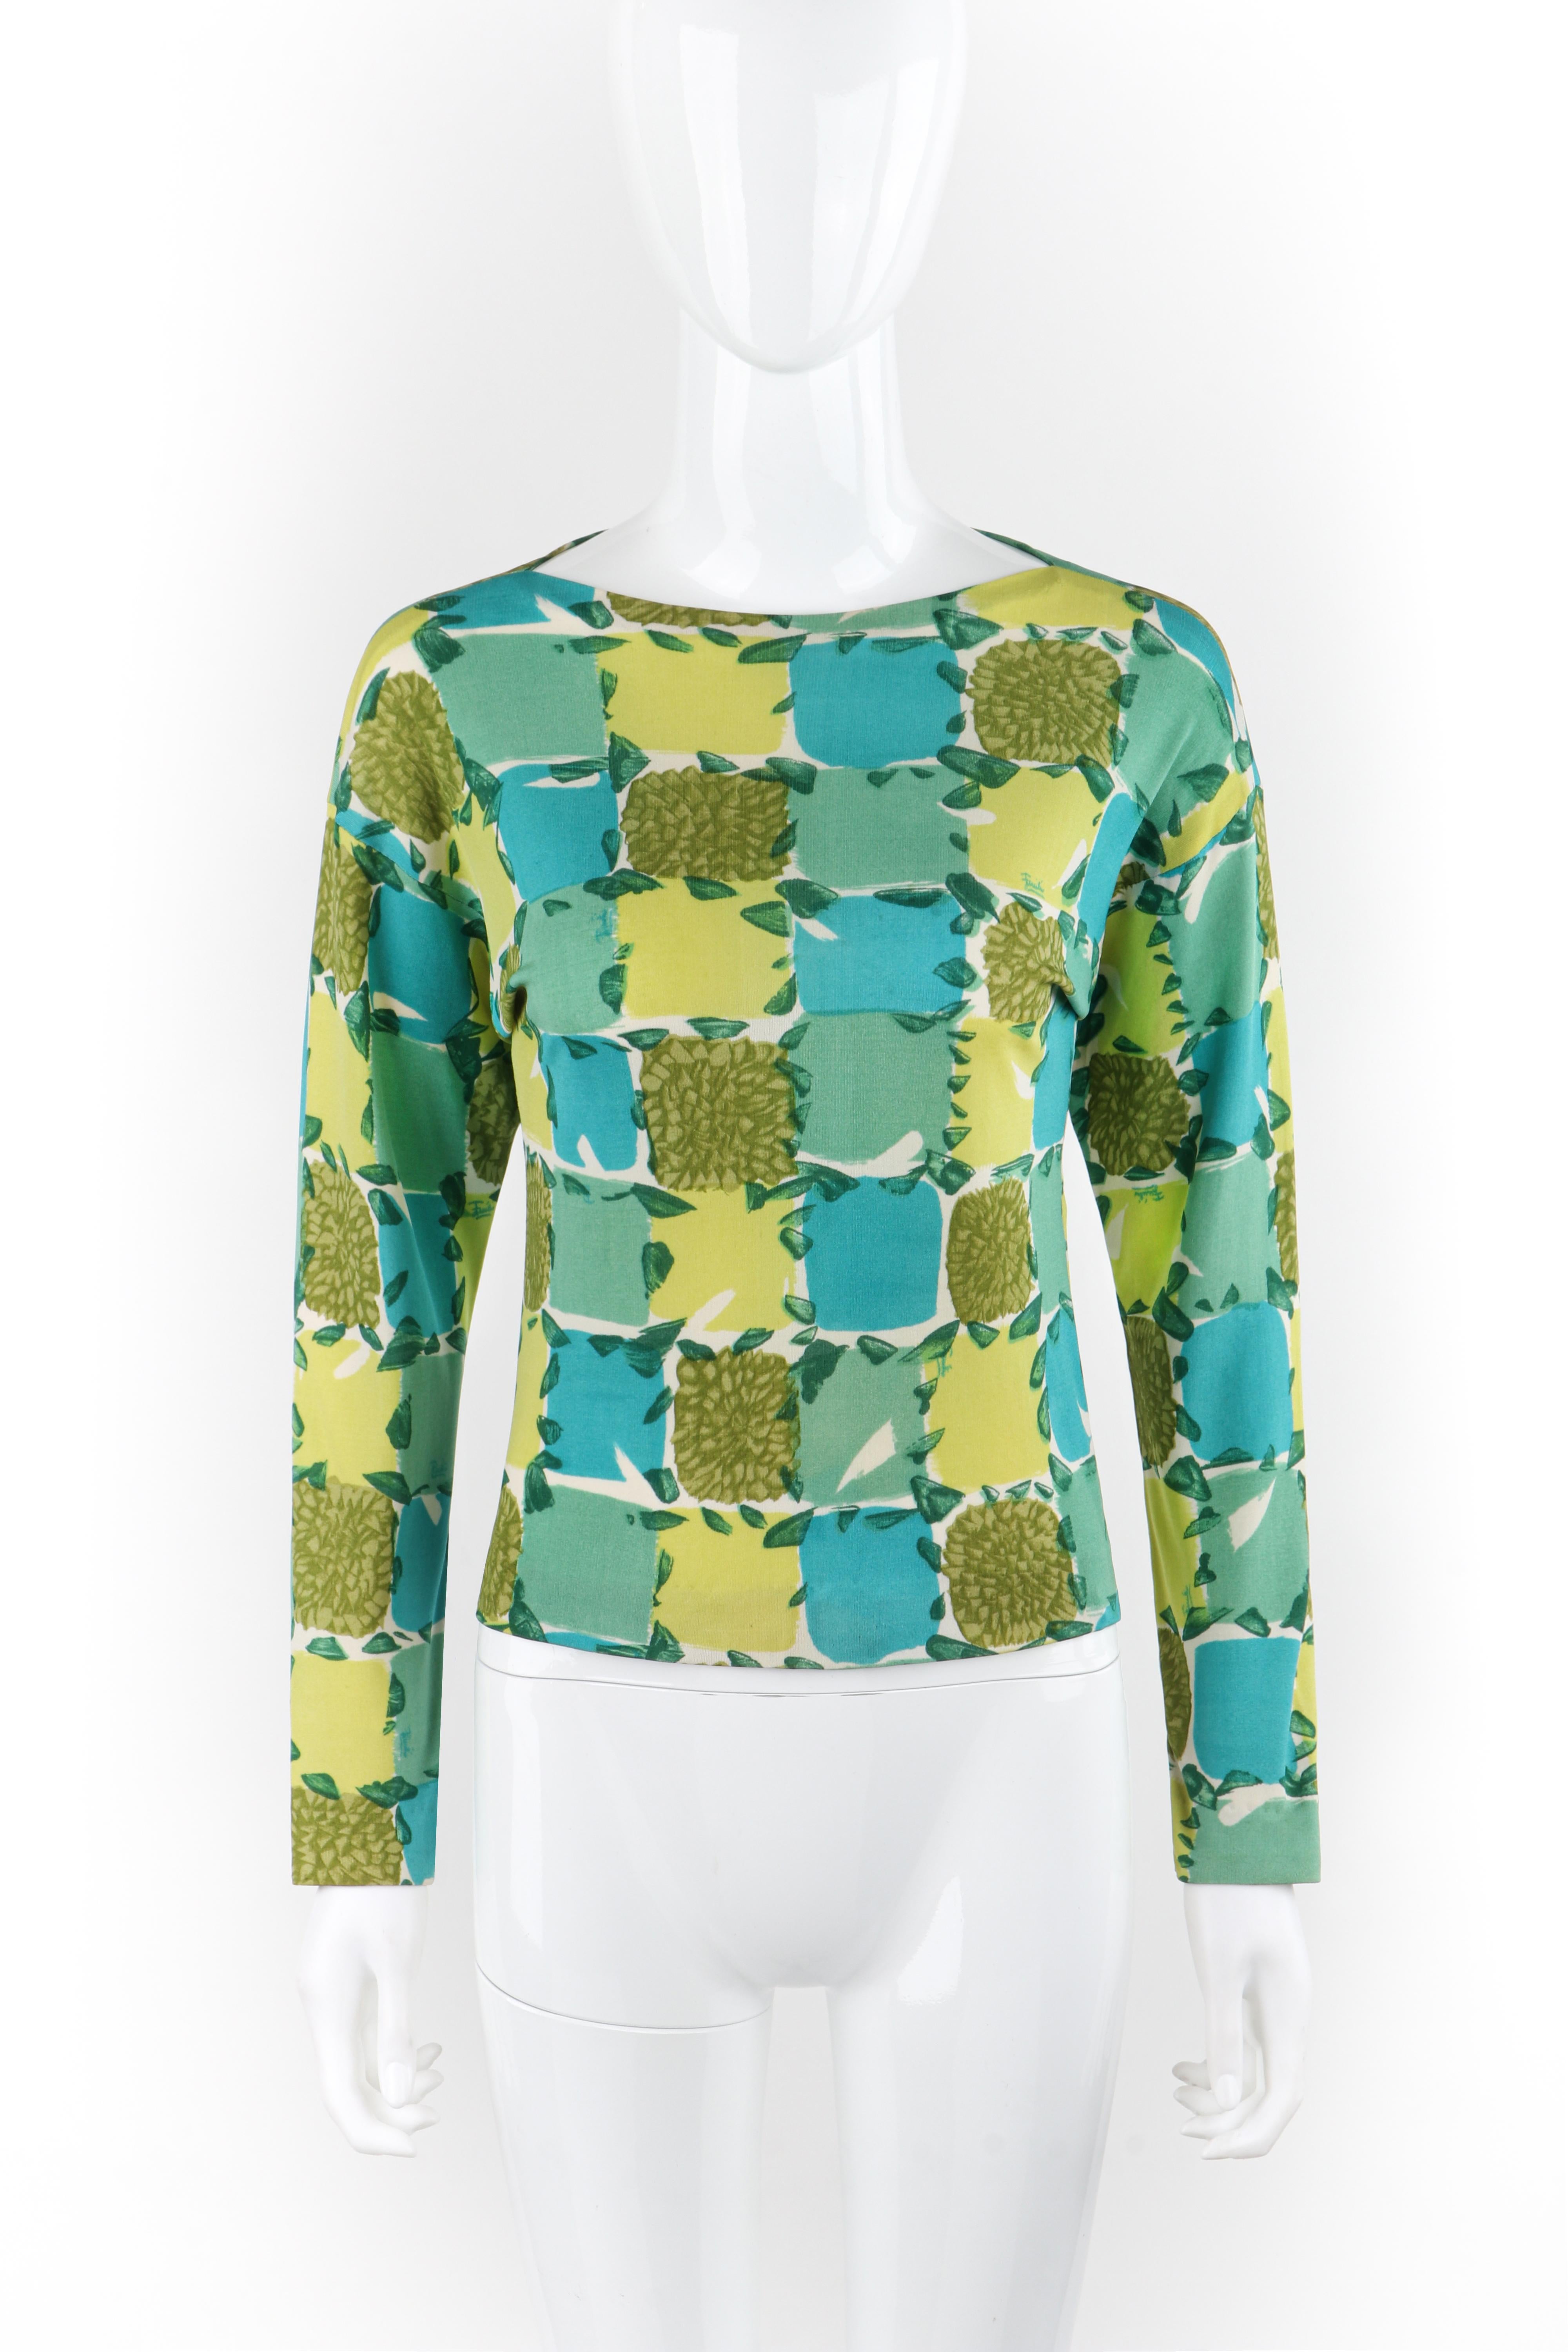 EMILIO PUCCI c.1956 Blue Yellow Green Abstract Floral Check Print Silk Sweater In Good Condition For Sale In Thiensville, WI